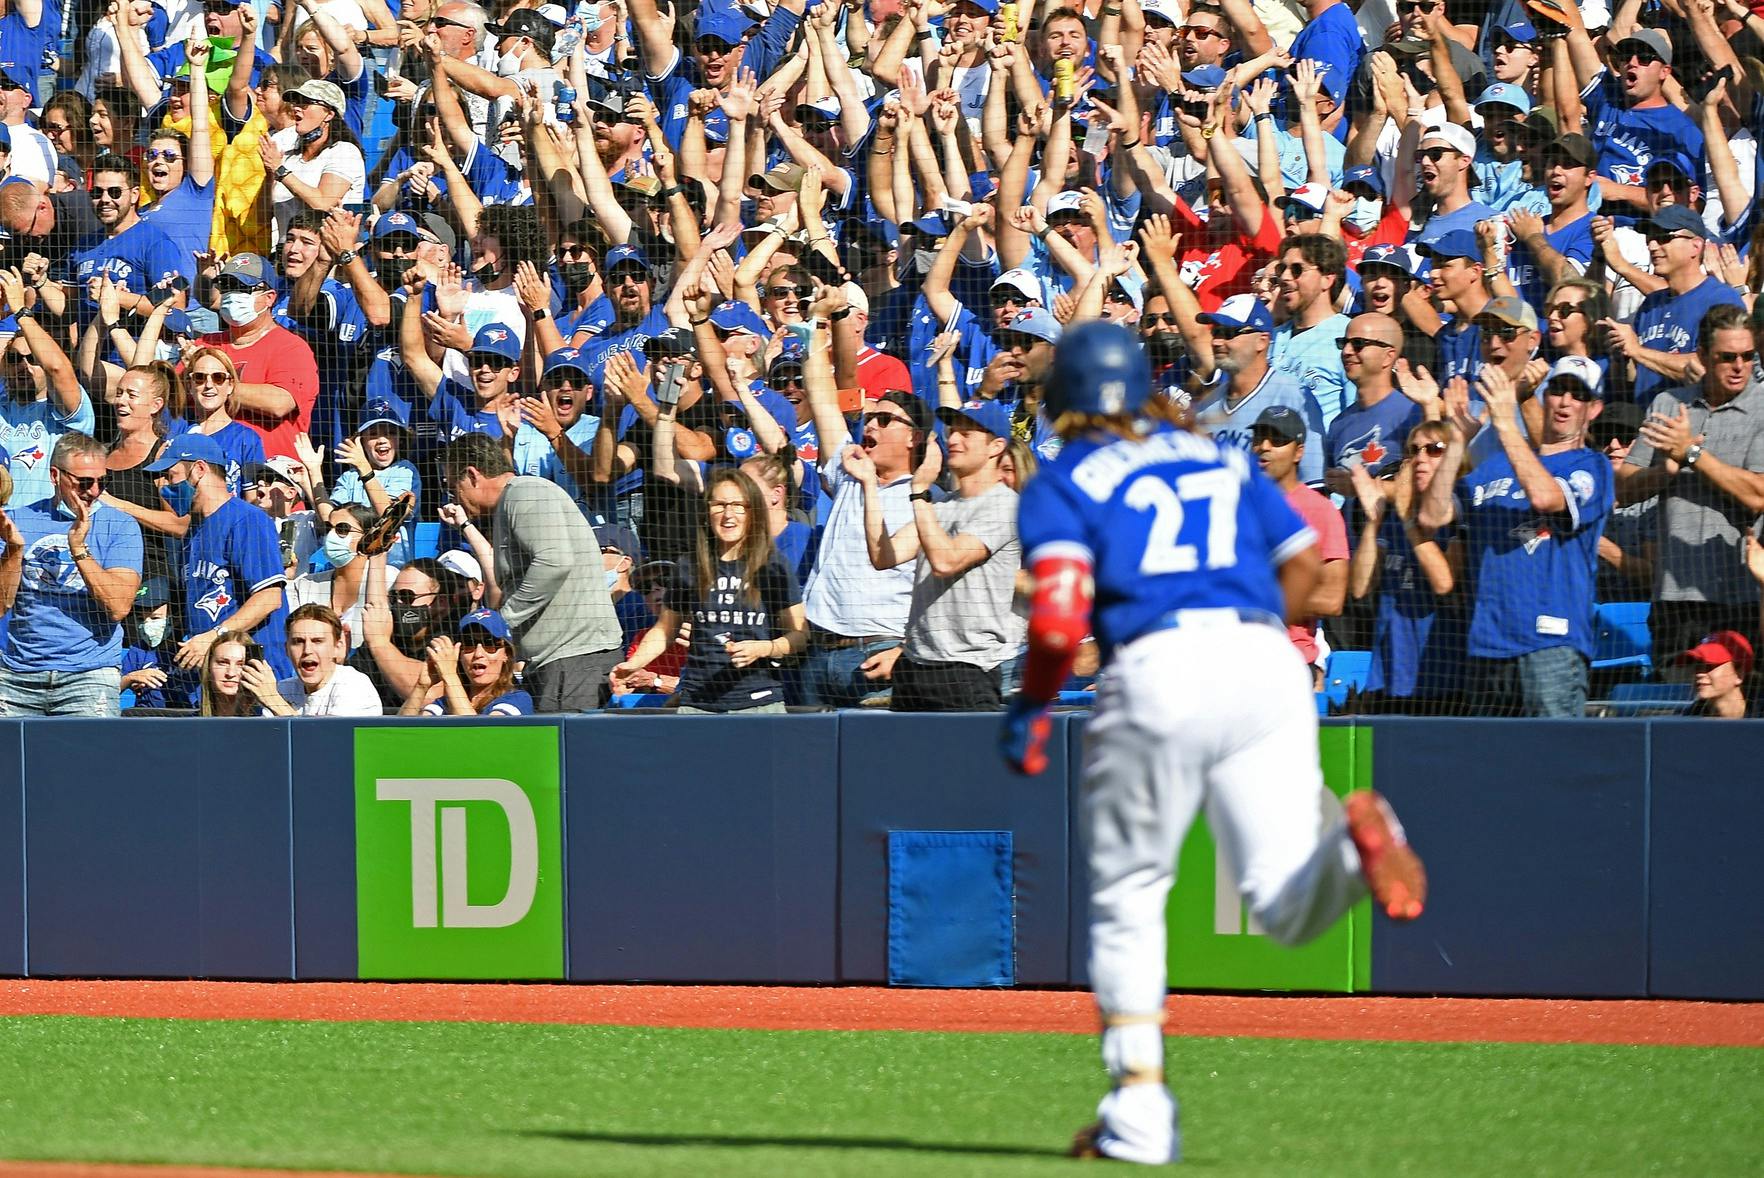 Blue Jays clinch homefield advantage in the wildcard series as